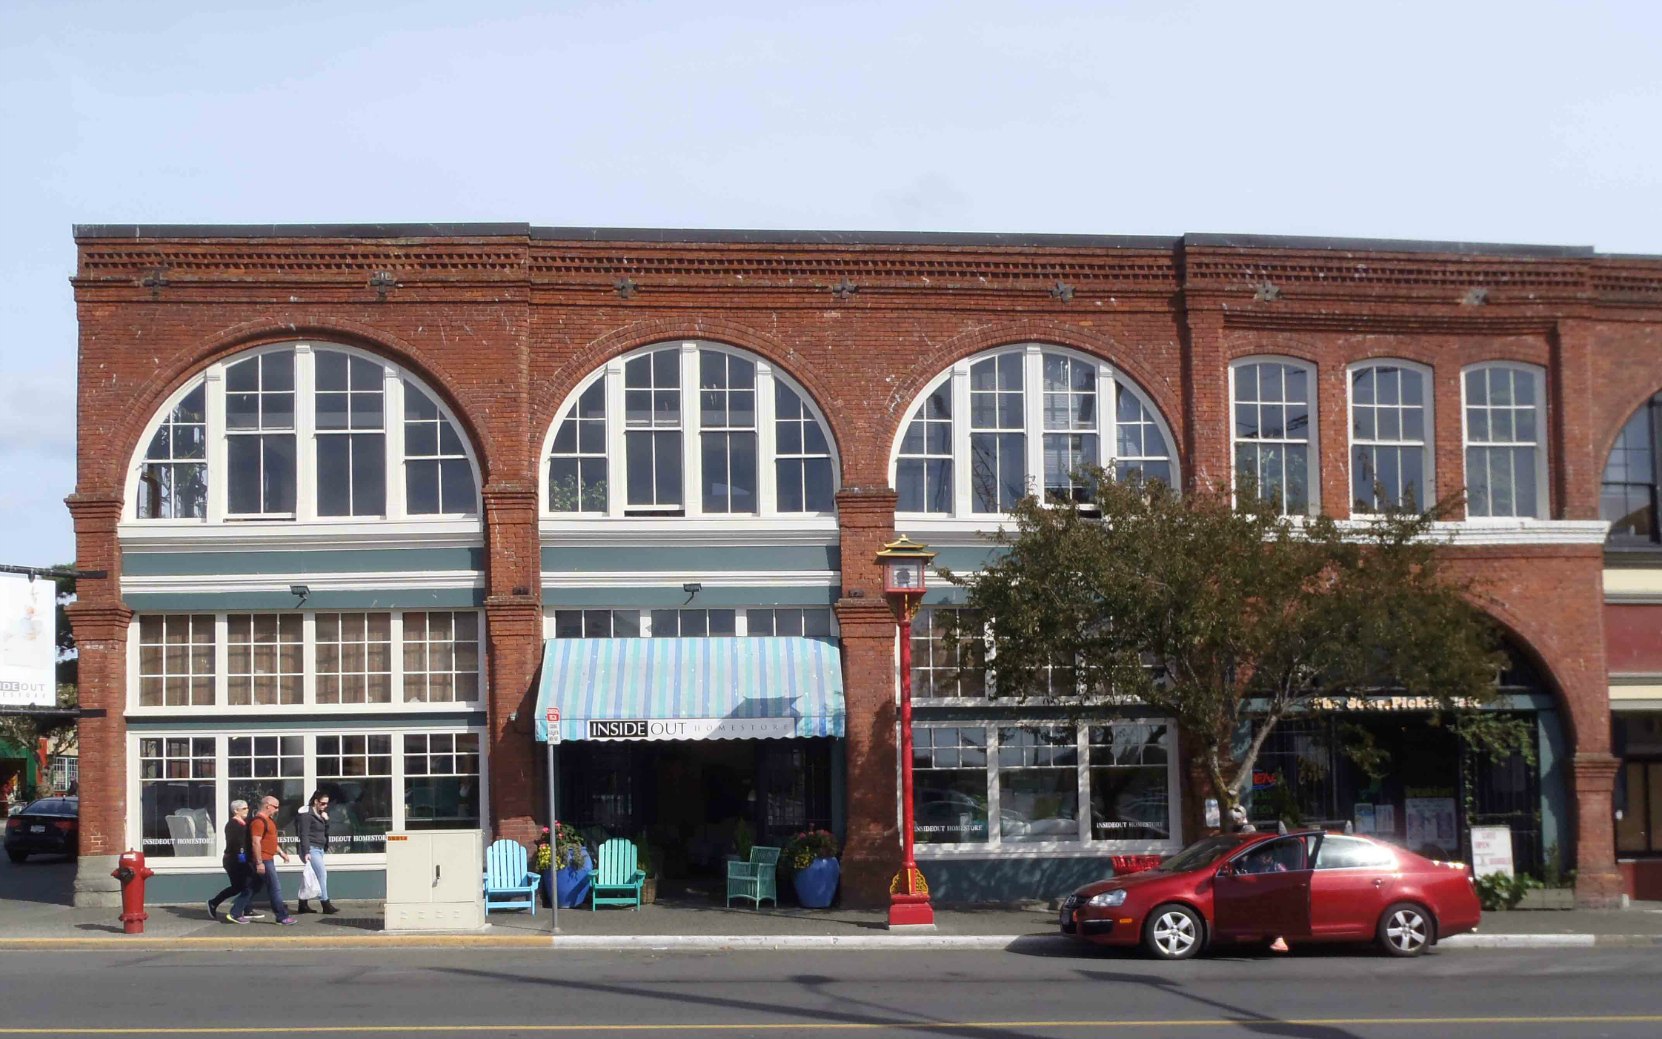 1623-627 Store Street, built in 1898 by architect Thomas Hooper